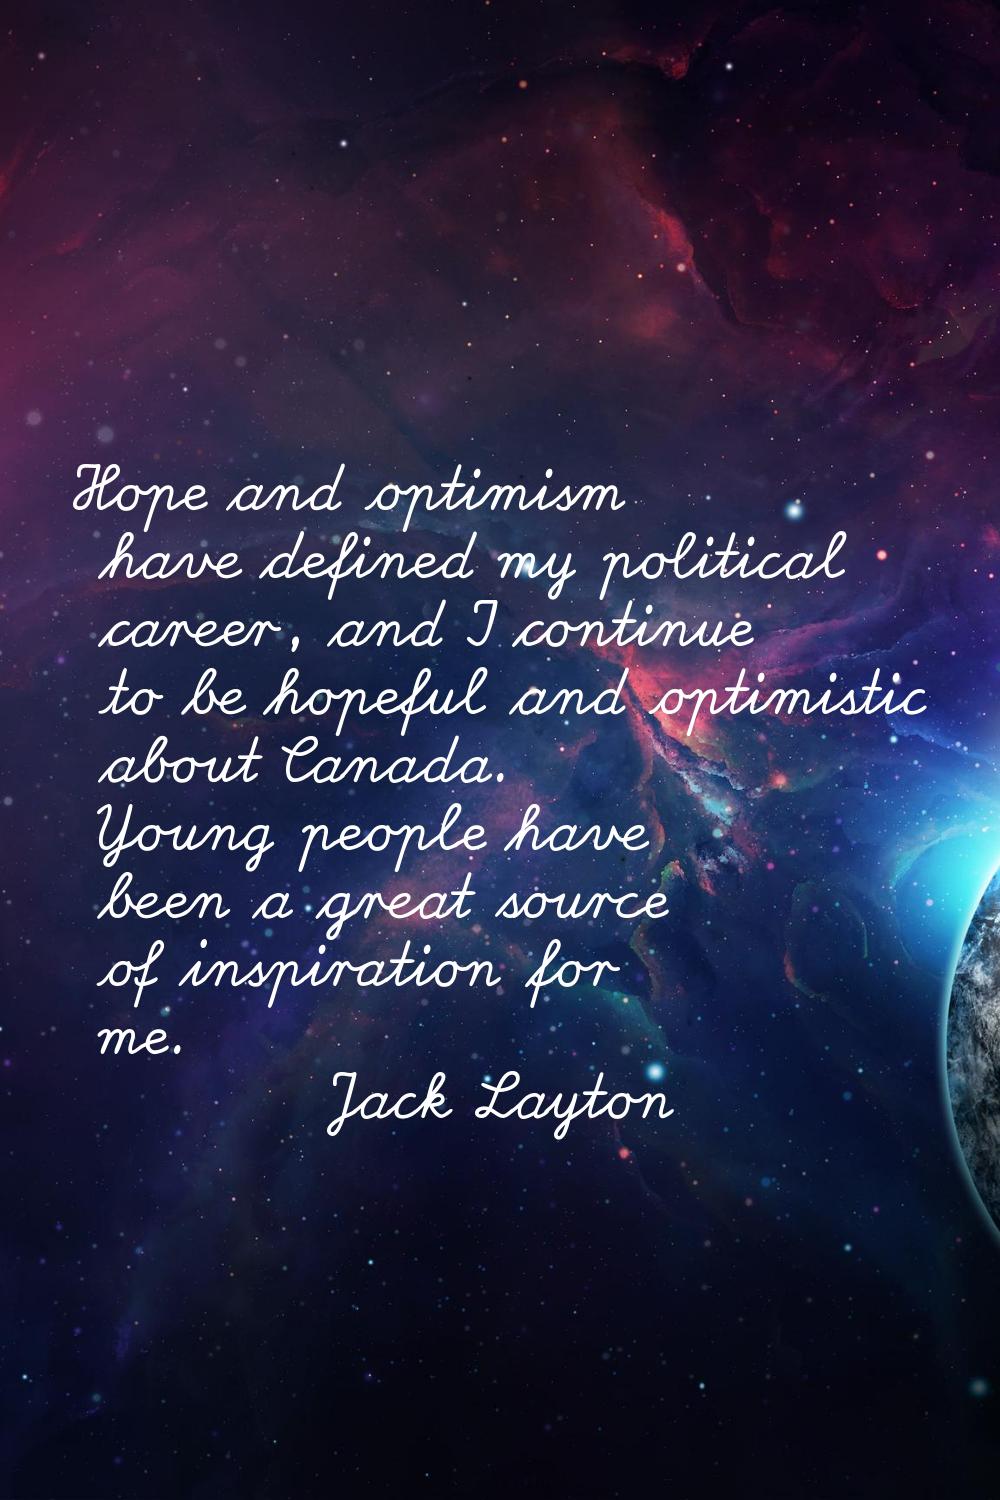 Hope and optimism have defined my political career, and I continue to be hopeful and optimistic abo